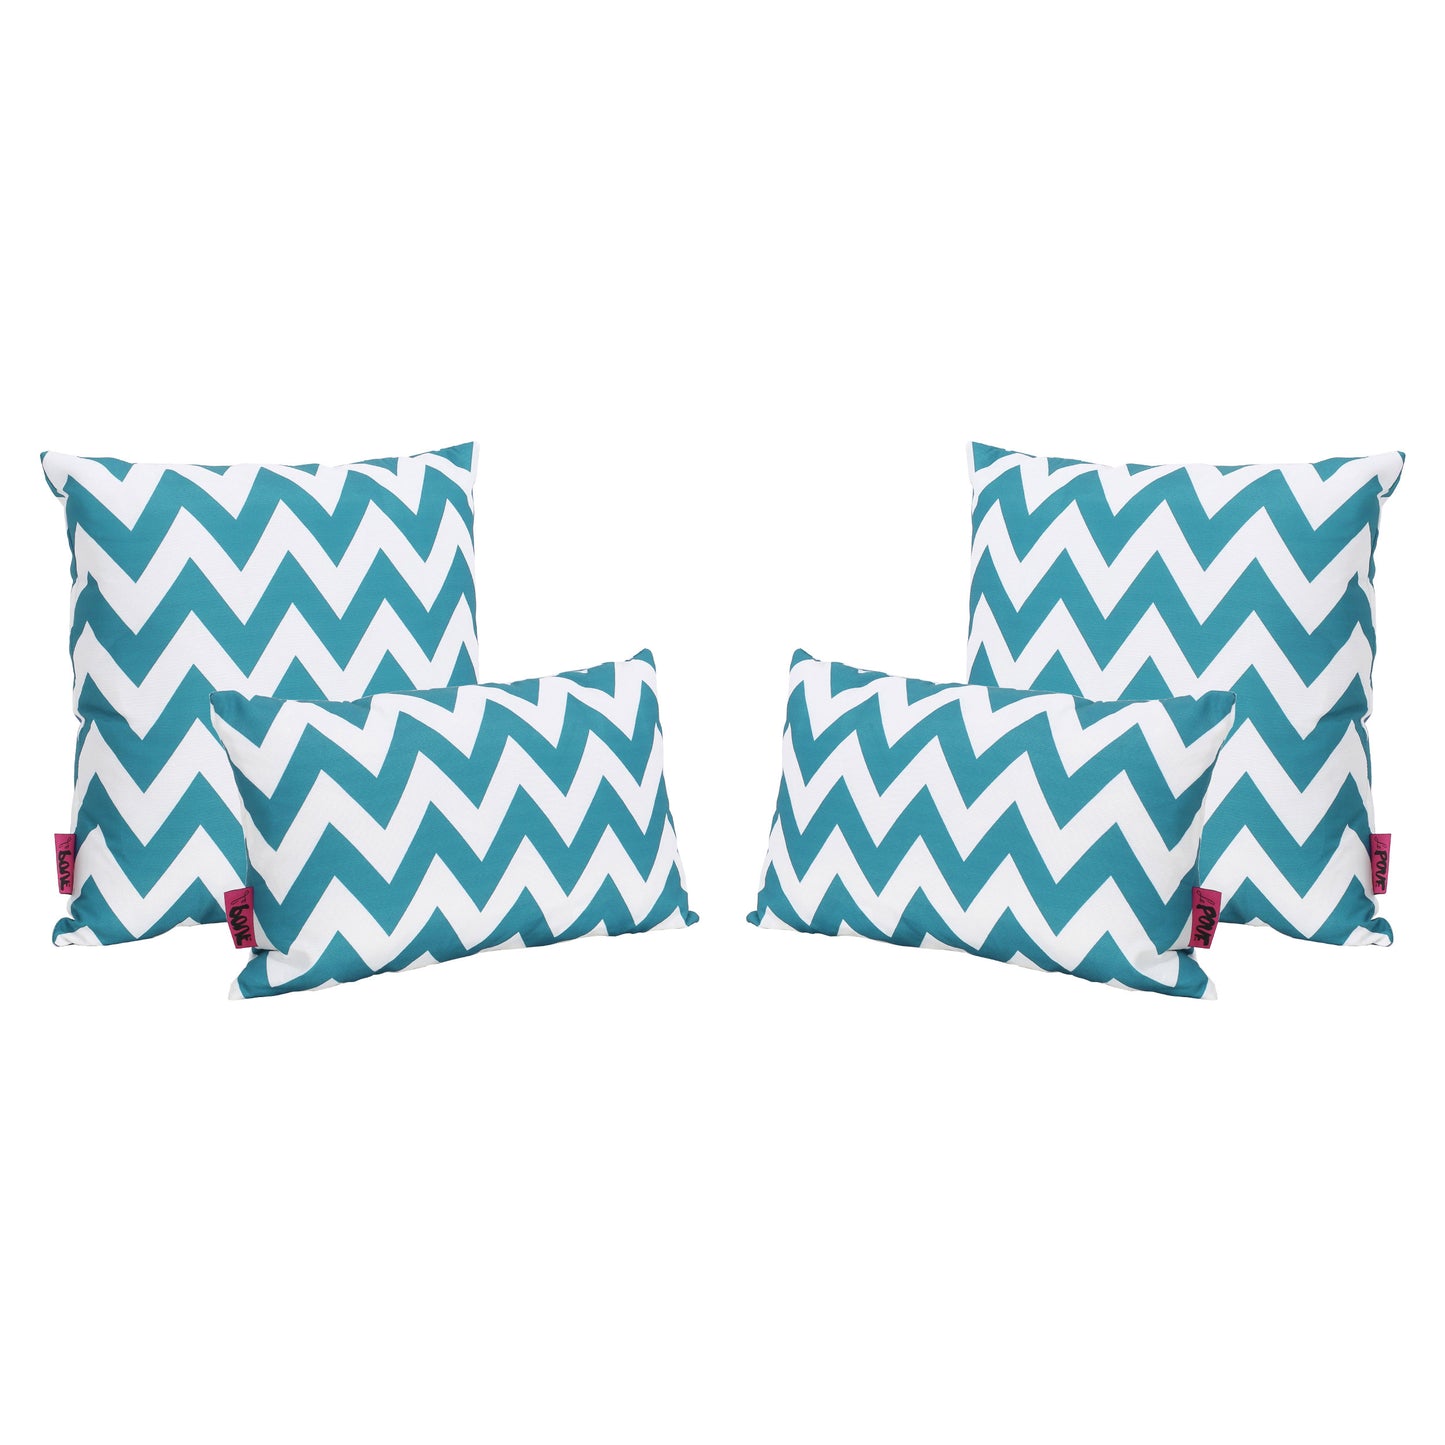 Embry Outdoor Water Resistant Square and Rectangular Pillows - Set of 4